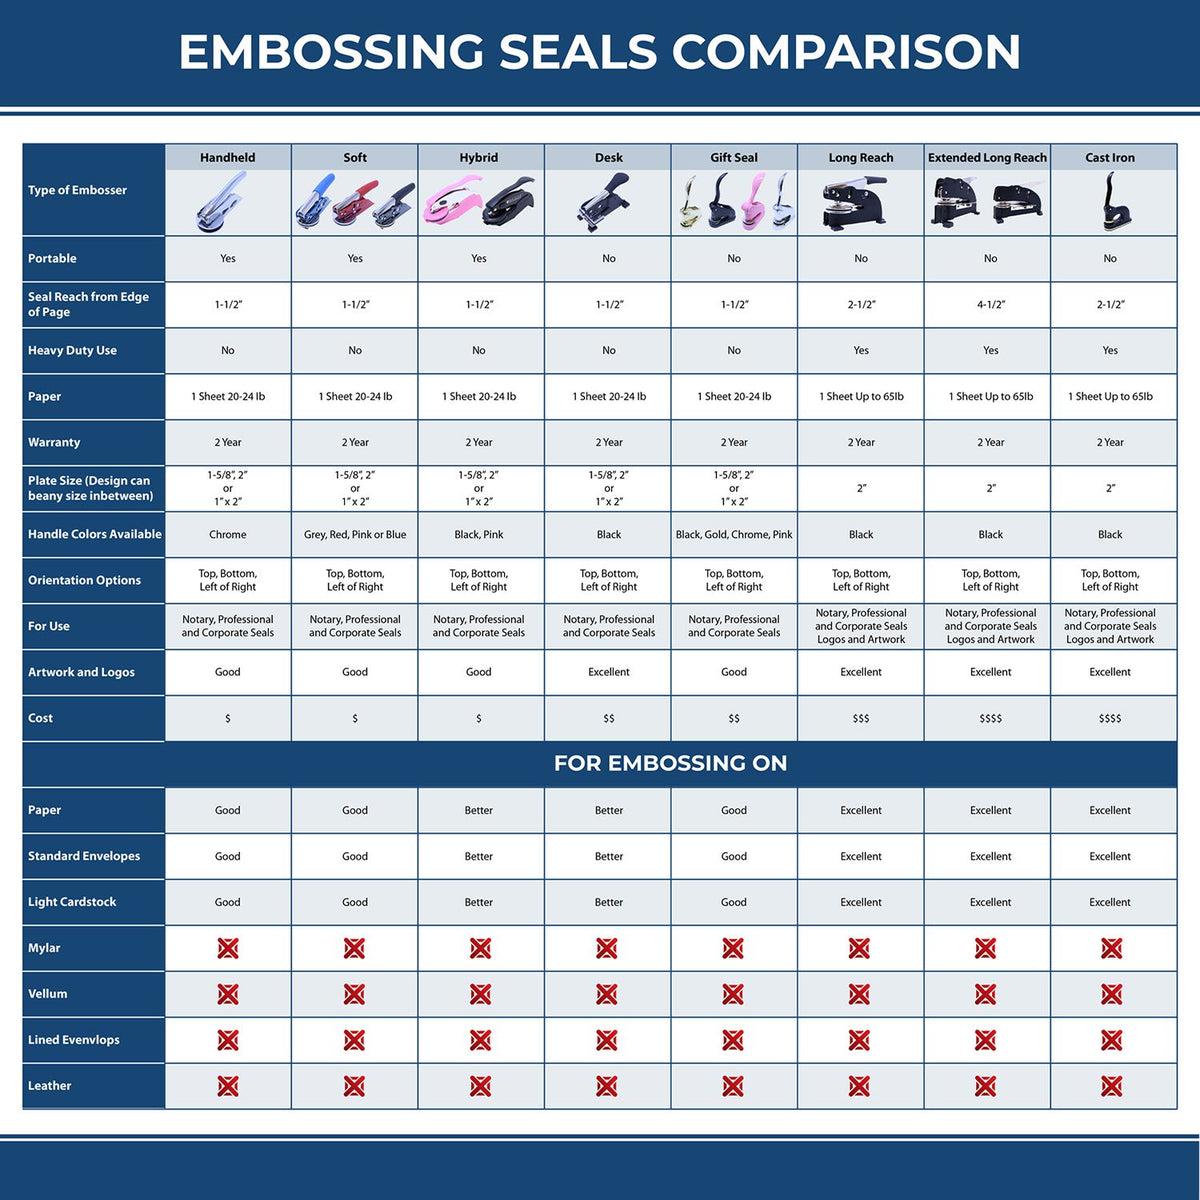 A comparison chart for the different types of mount models available for the Handheld Pennsylvania Professional Engineer Embosser.